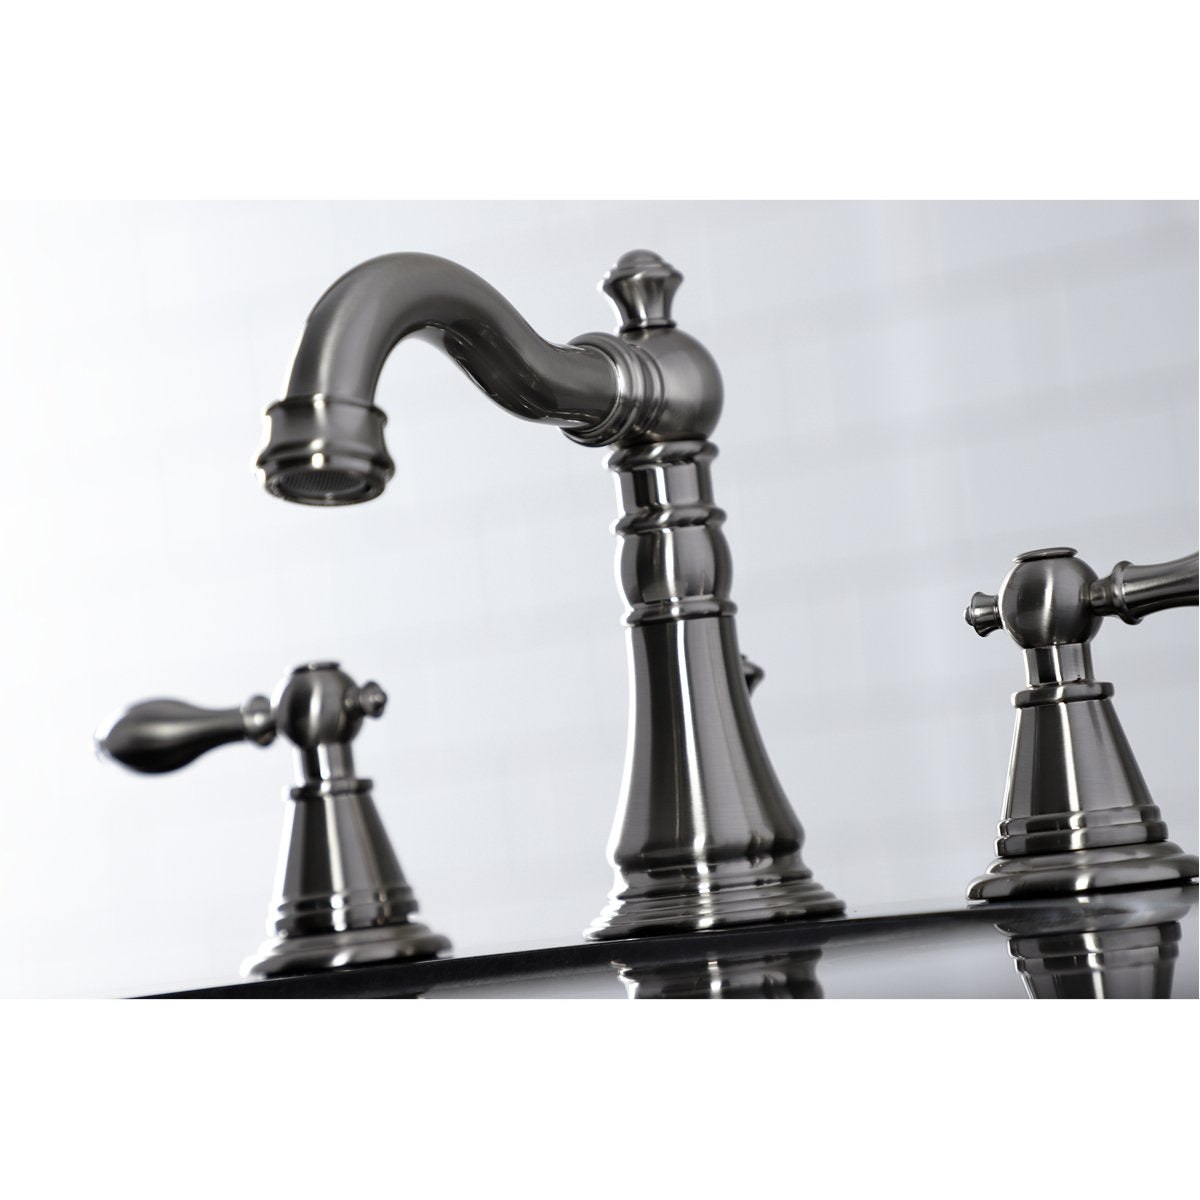 Kingston Brass Fauceture English Classic Widespread Bathroom Faucet